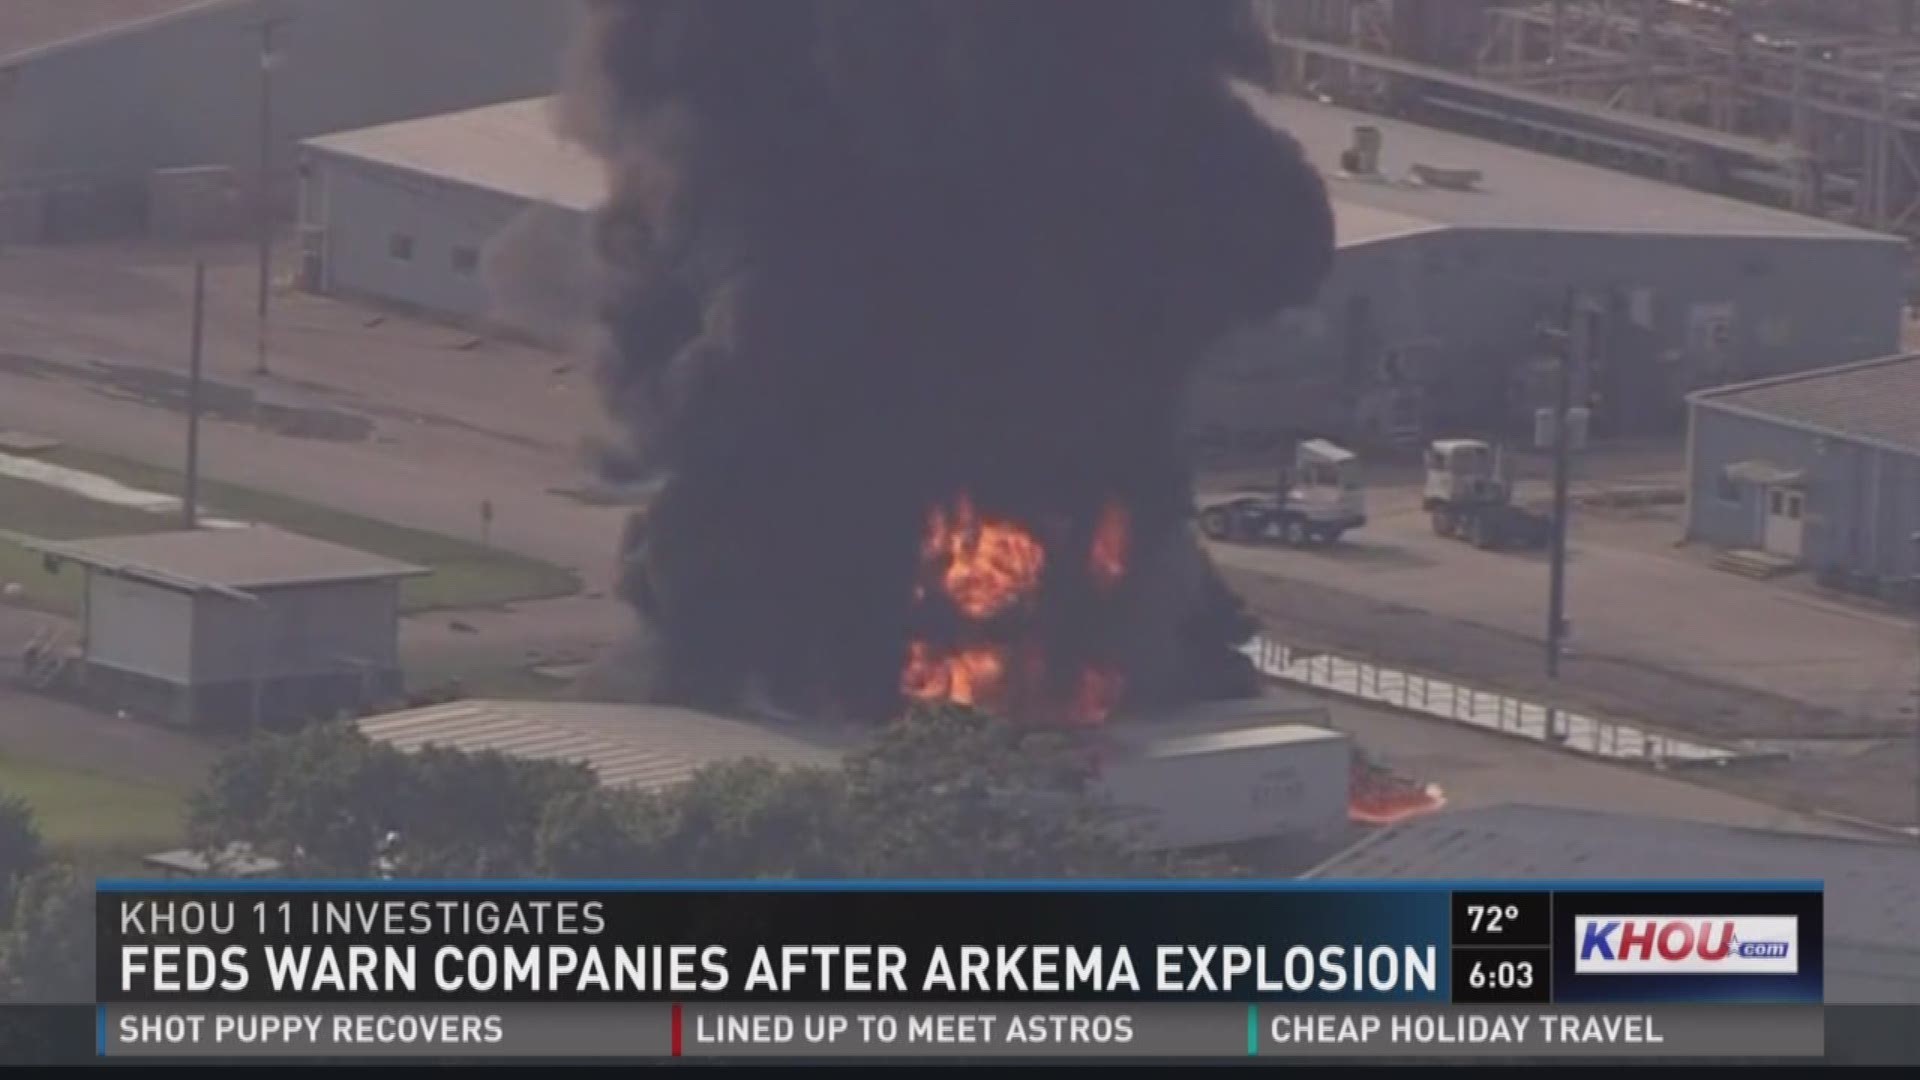 Investigators are trying to get the word out to other companies about taking safety precautions after the Arkema plant explosion in Crosby a few months ago.